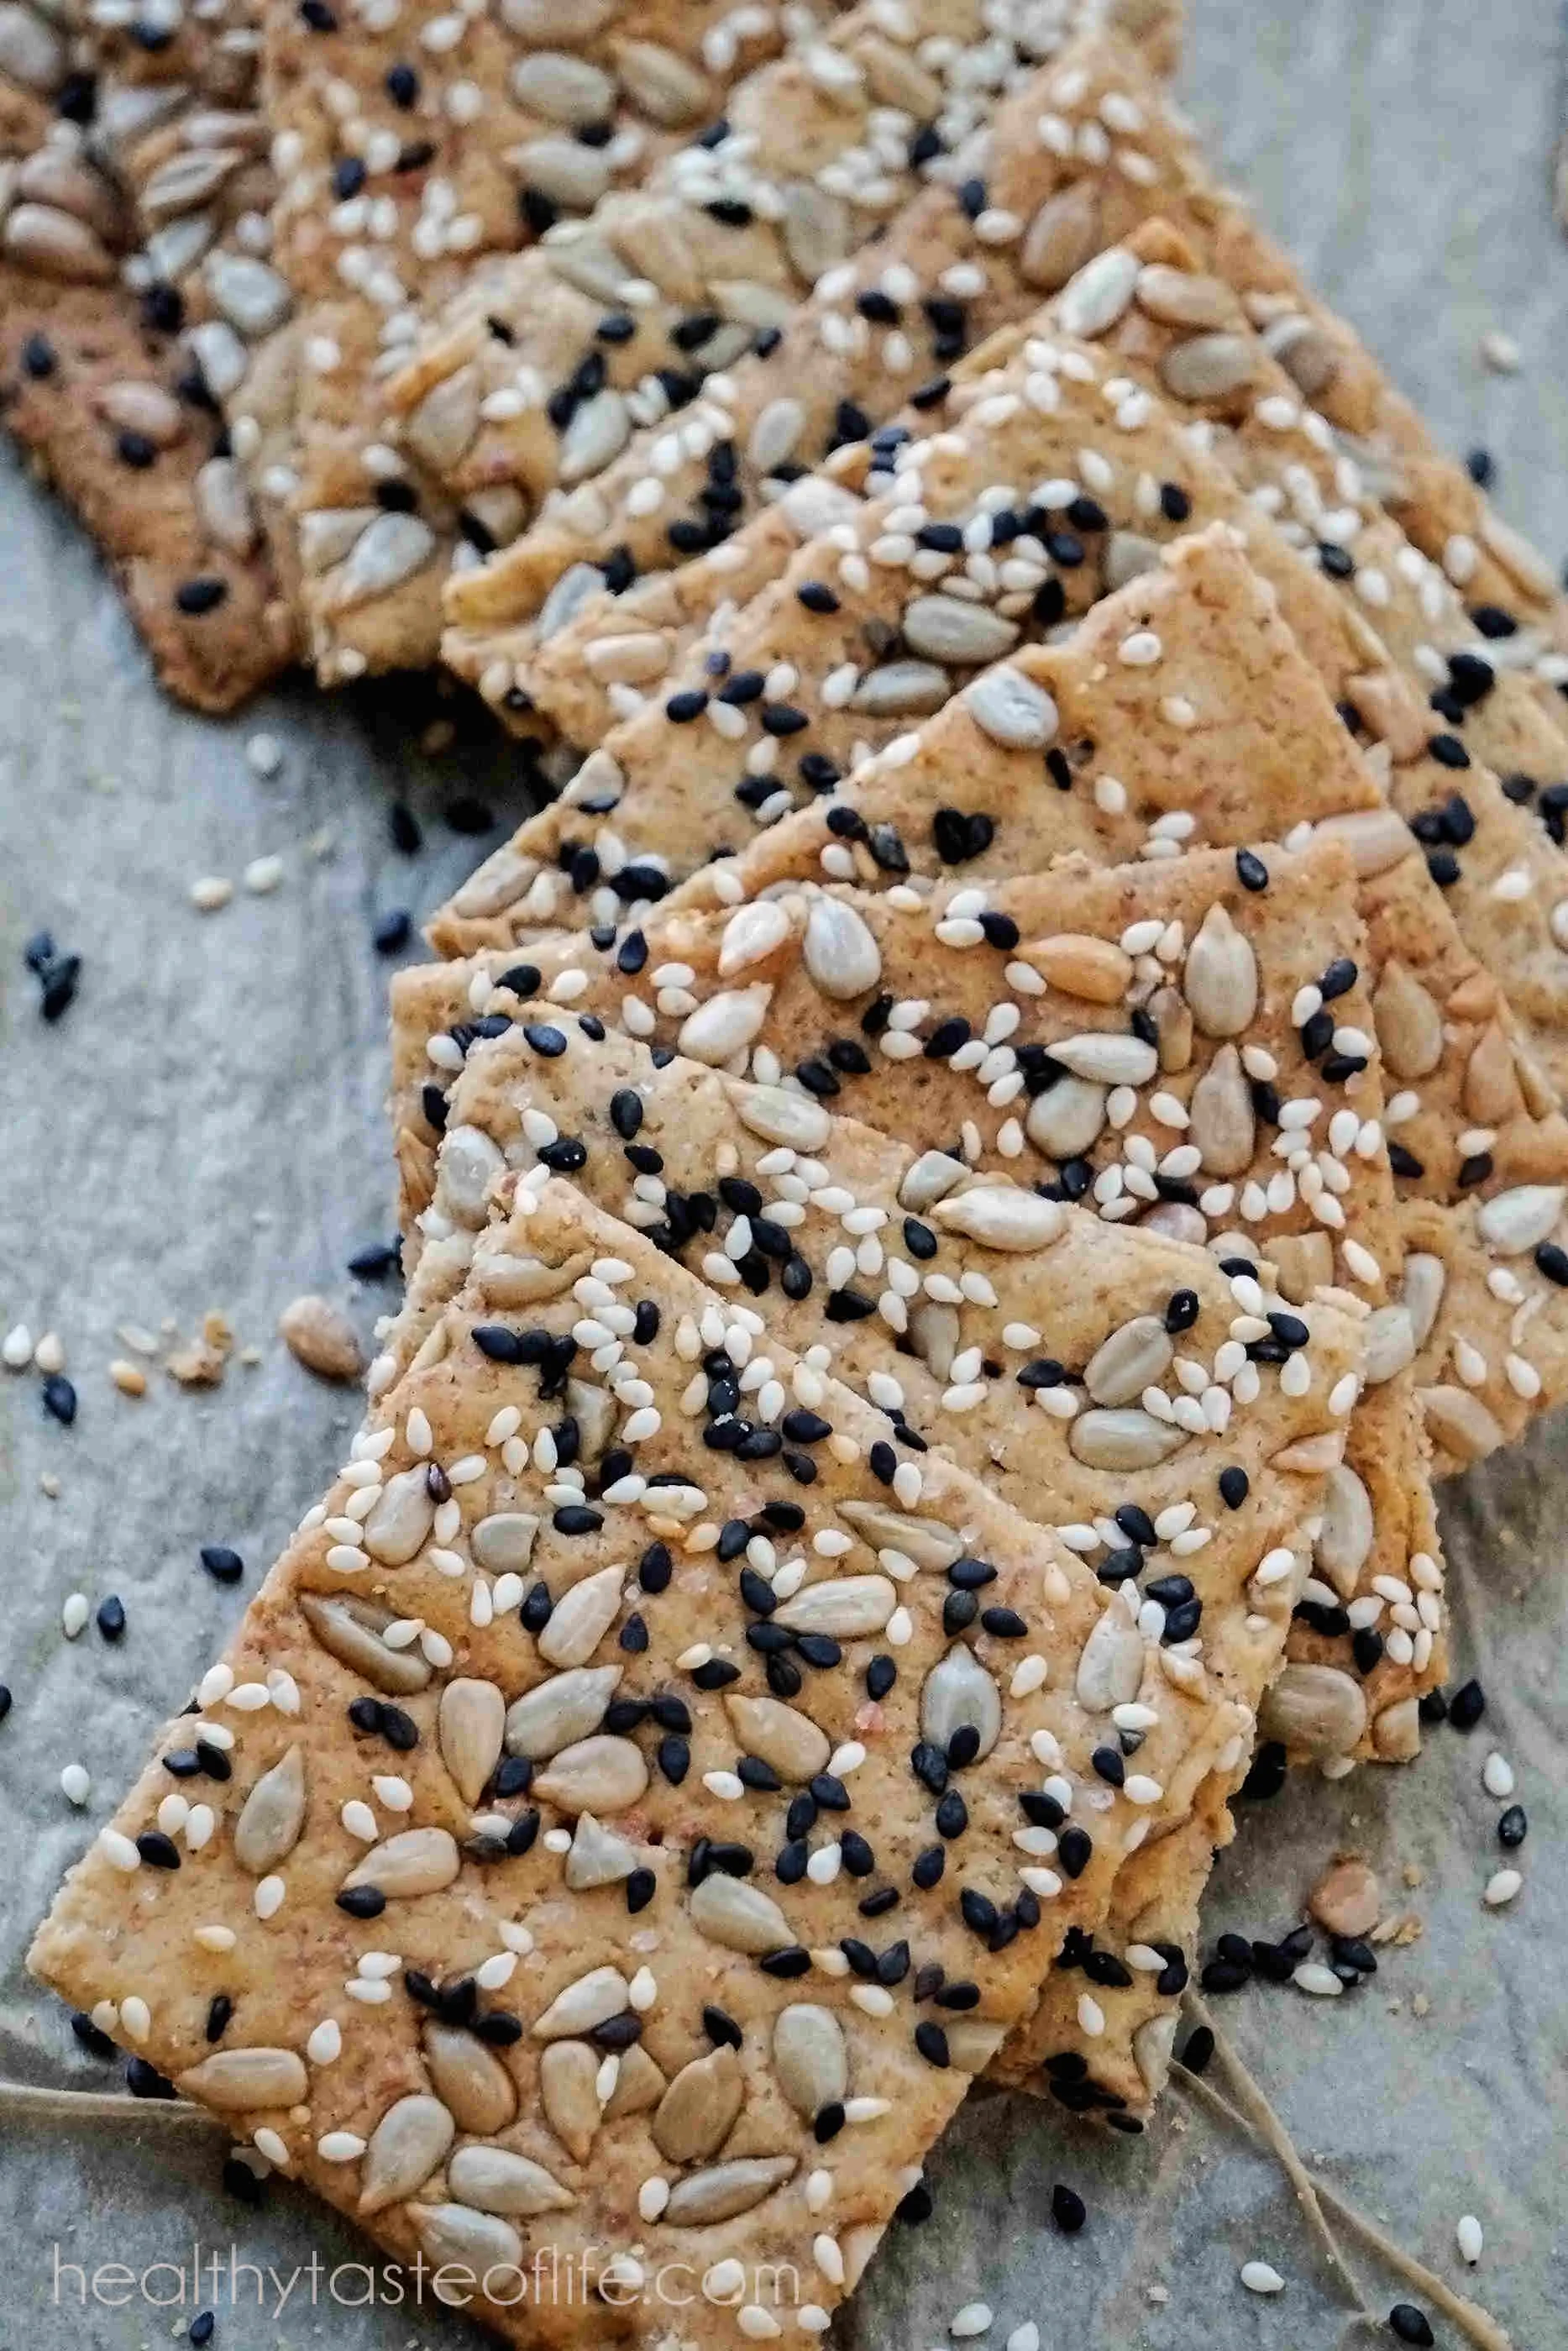 This homemade gluten free crackers recipe uses a mix of gluten free flours including rice flour and a variety of seeds. 